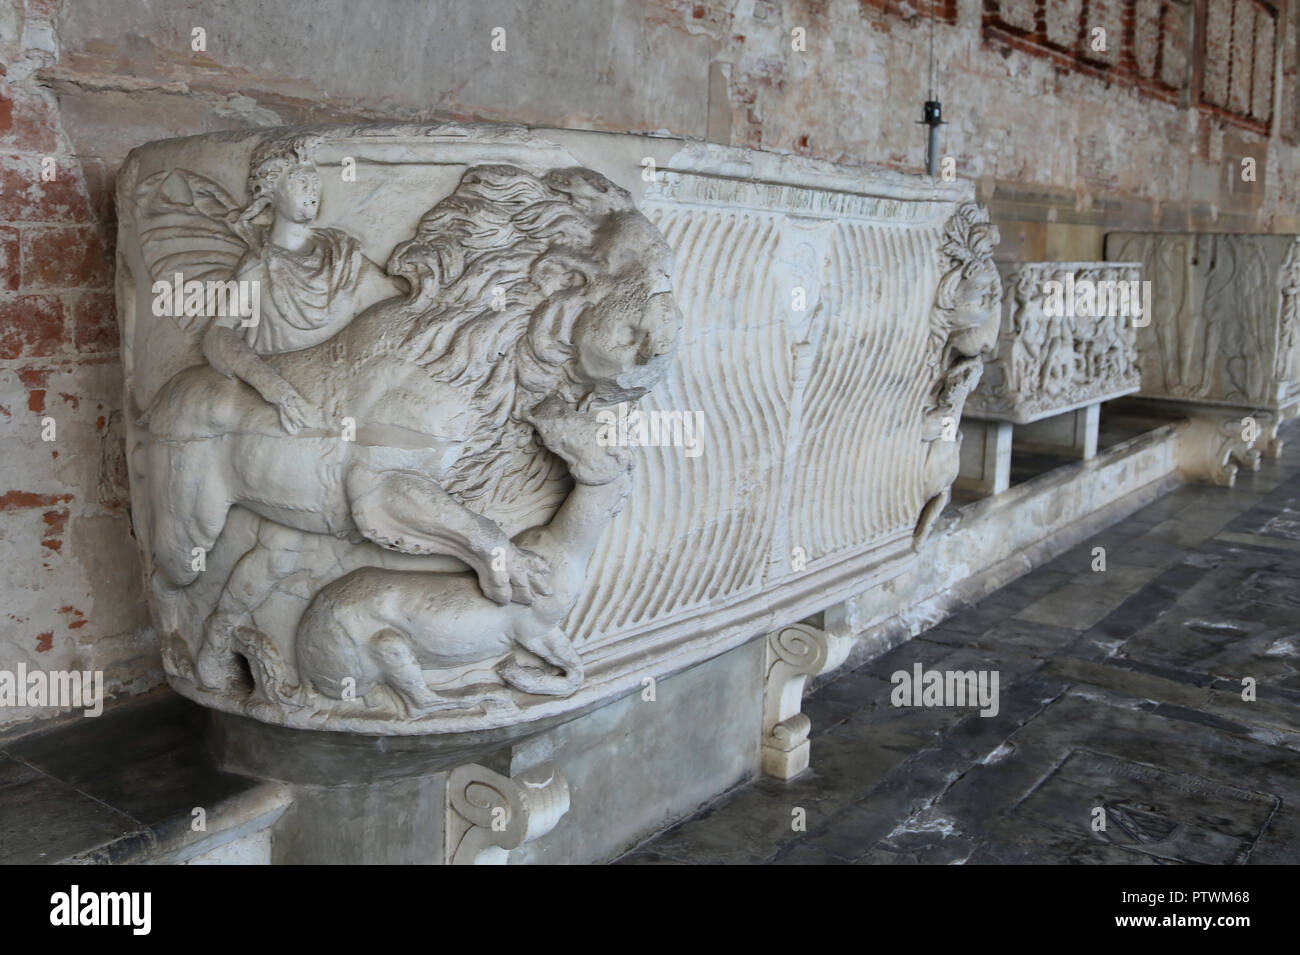 Italy. Pisa. CampoSanto. Roman sarcophagus. Lion devouring a horse with male figure in a tunic and cloak and strigilatd ornament Stock Photo